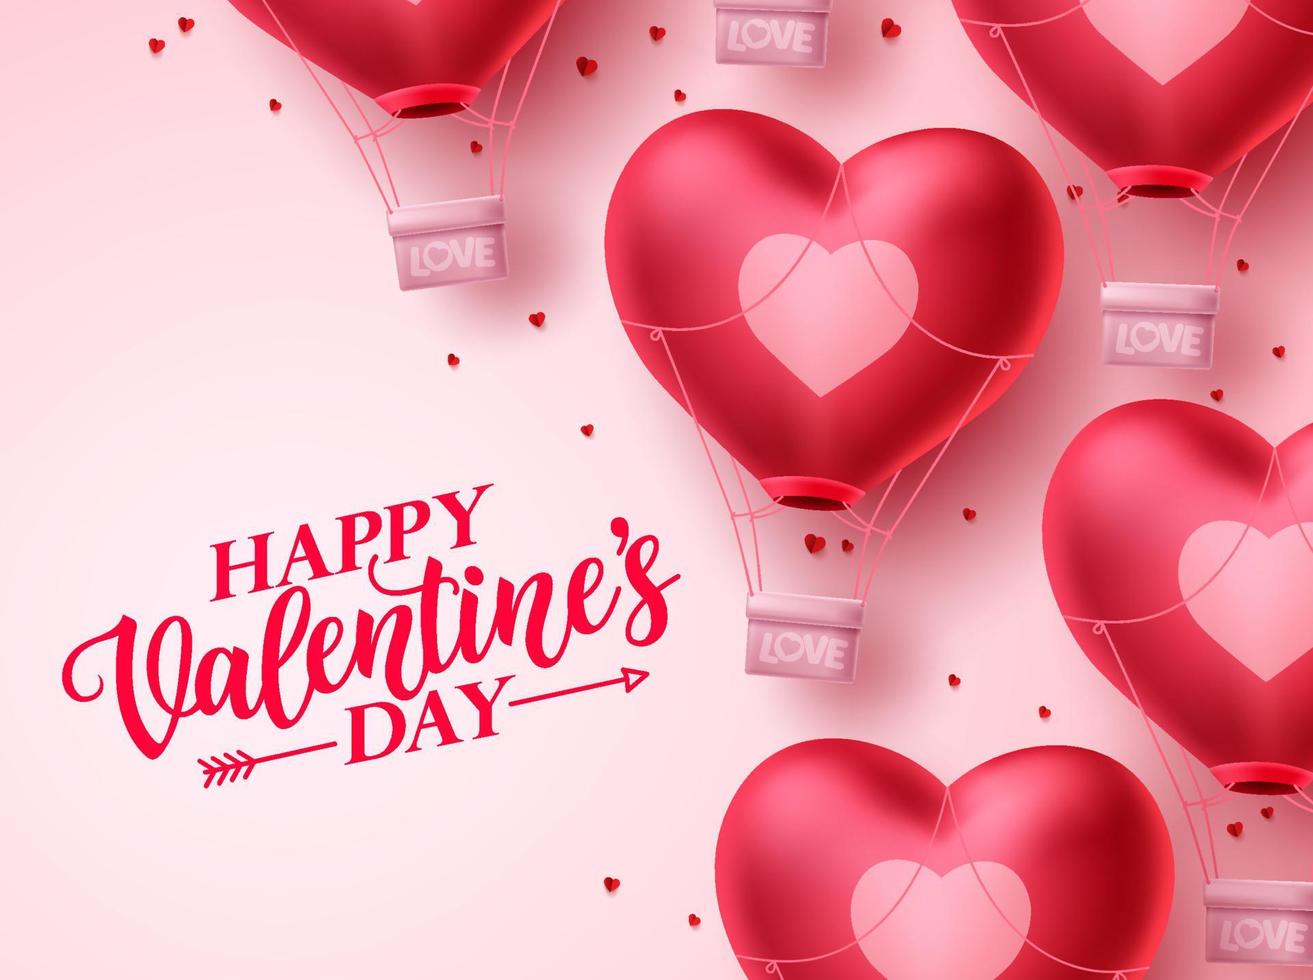 Happy valentines day heart balloon vector background. Valentines day greeting text with flying heart air balloon elements in white background. Vector Illustration.